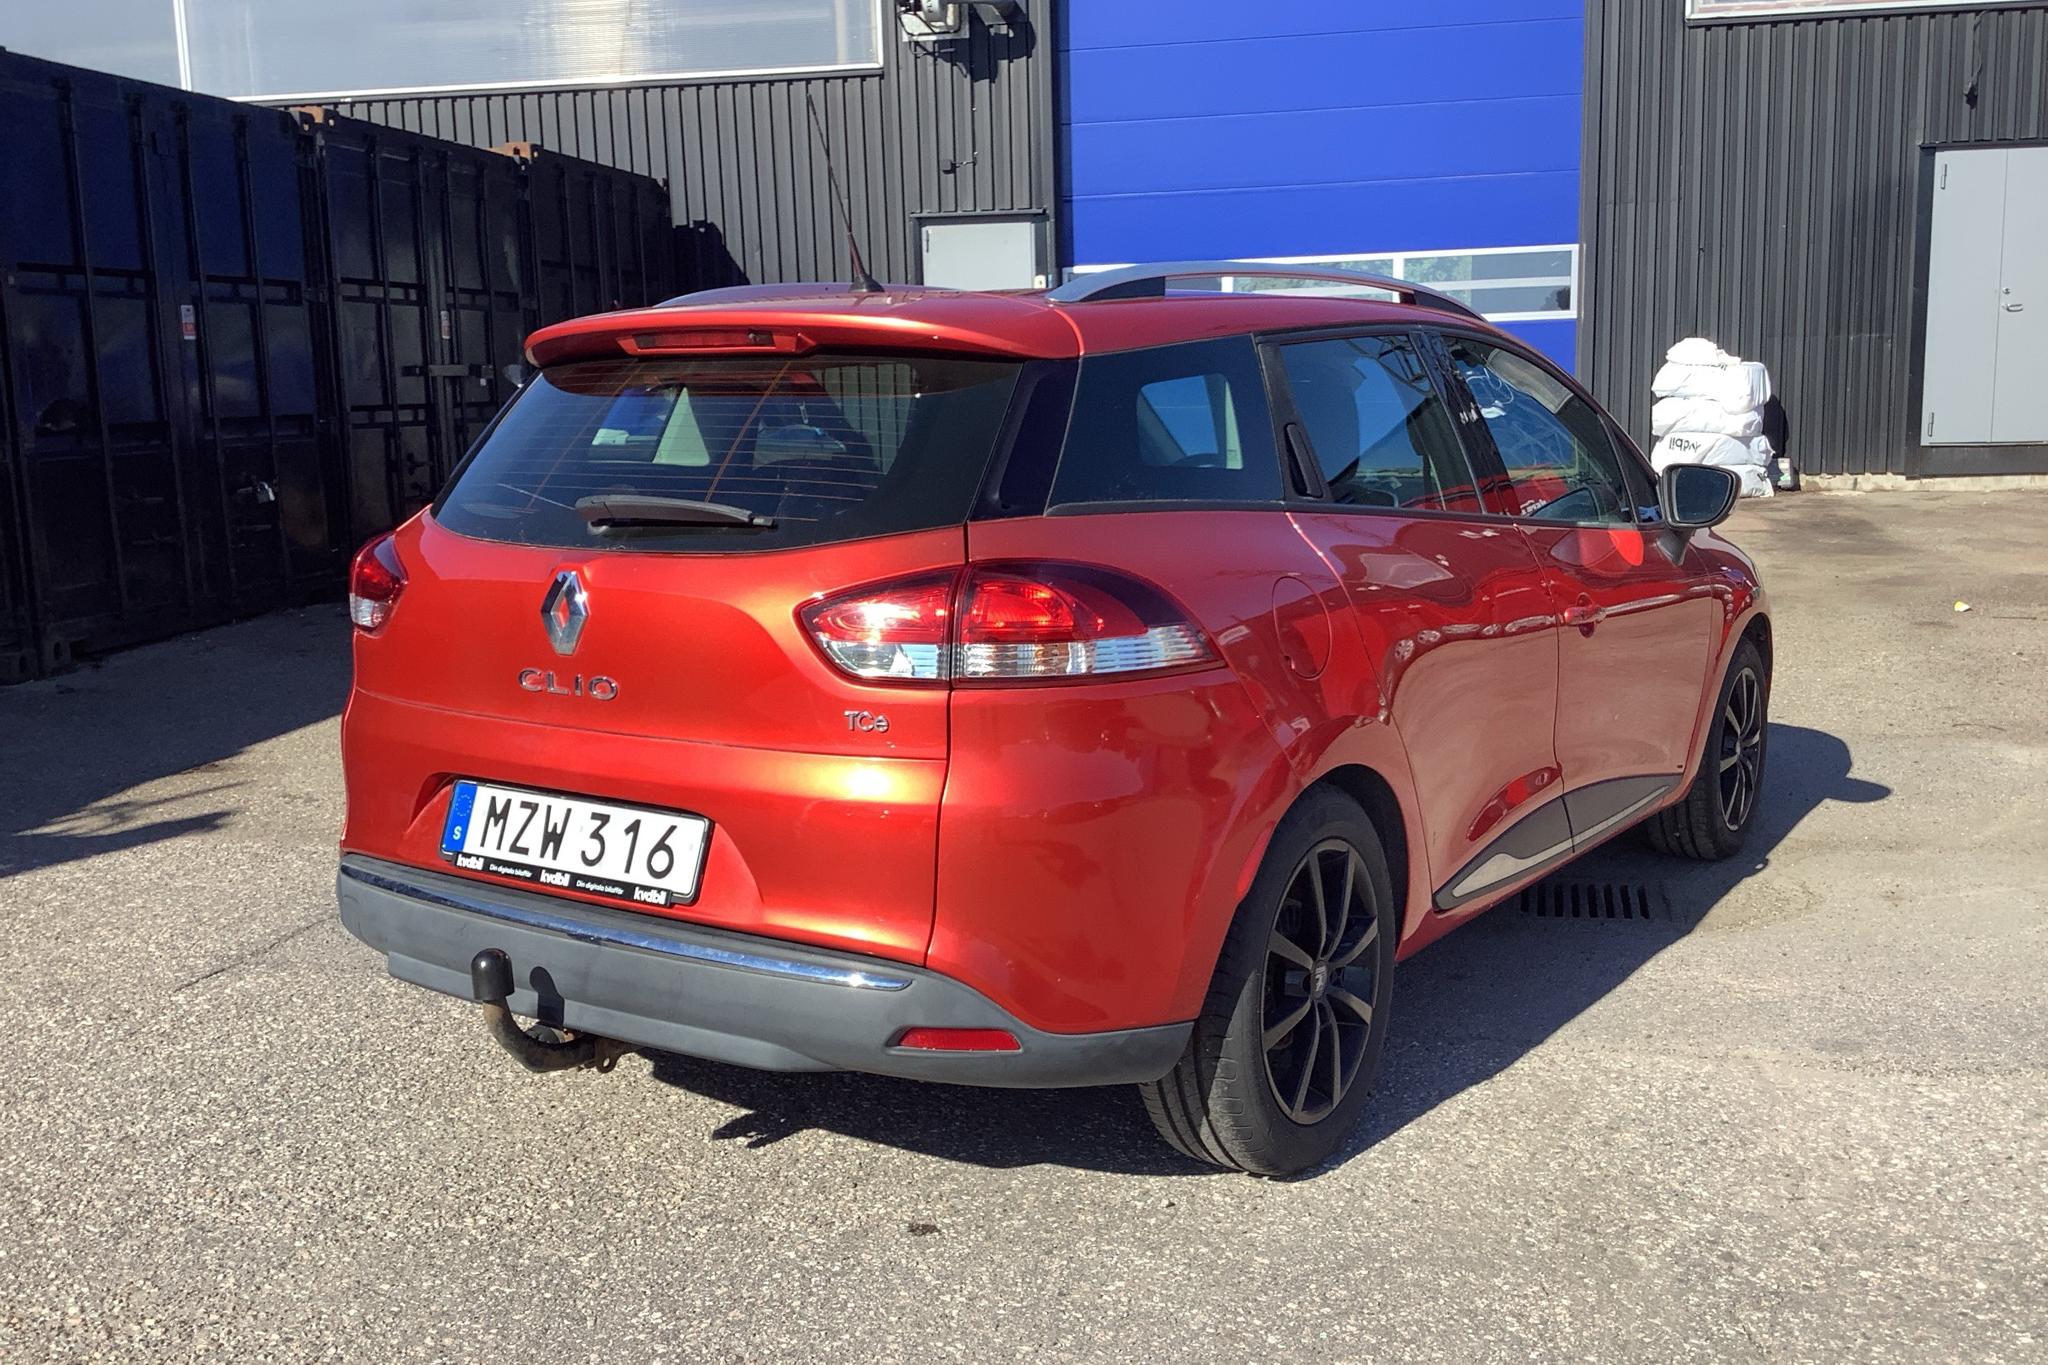 Renault Clio IV 0.9 TCe 90 Sports Tourer (90hk) - 98 820 km - Manual - red - 2015